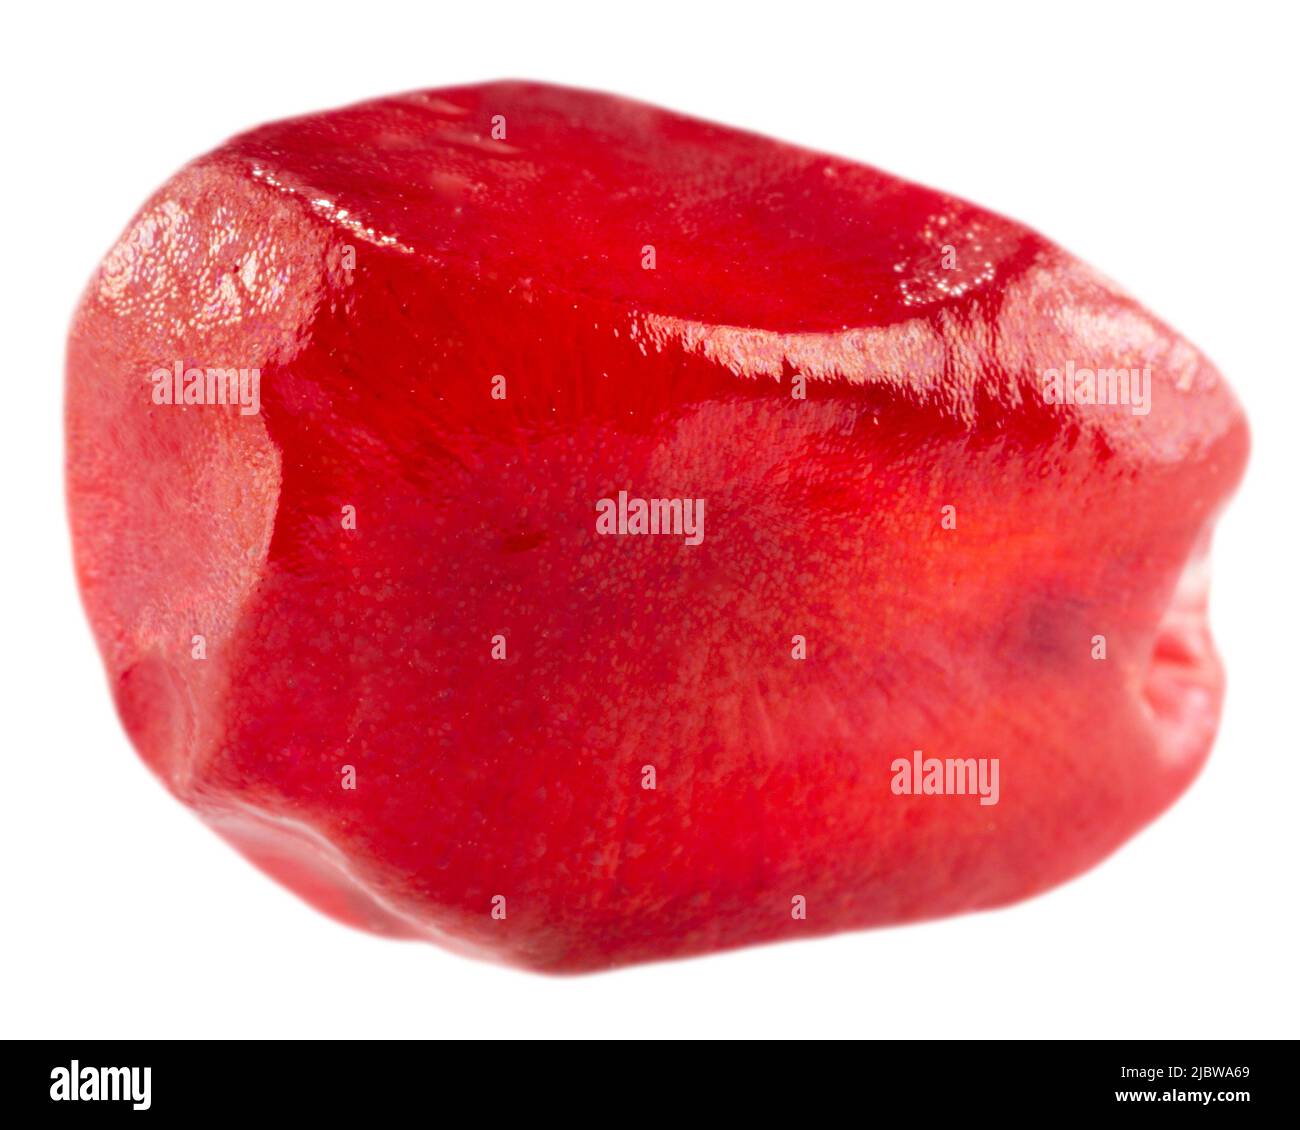 pomegranate seed isolated on a white background with clipping path. Stock Photo